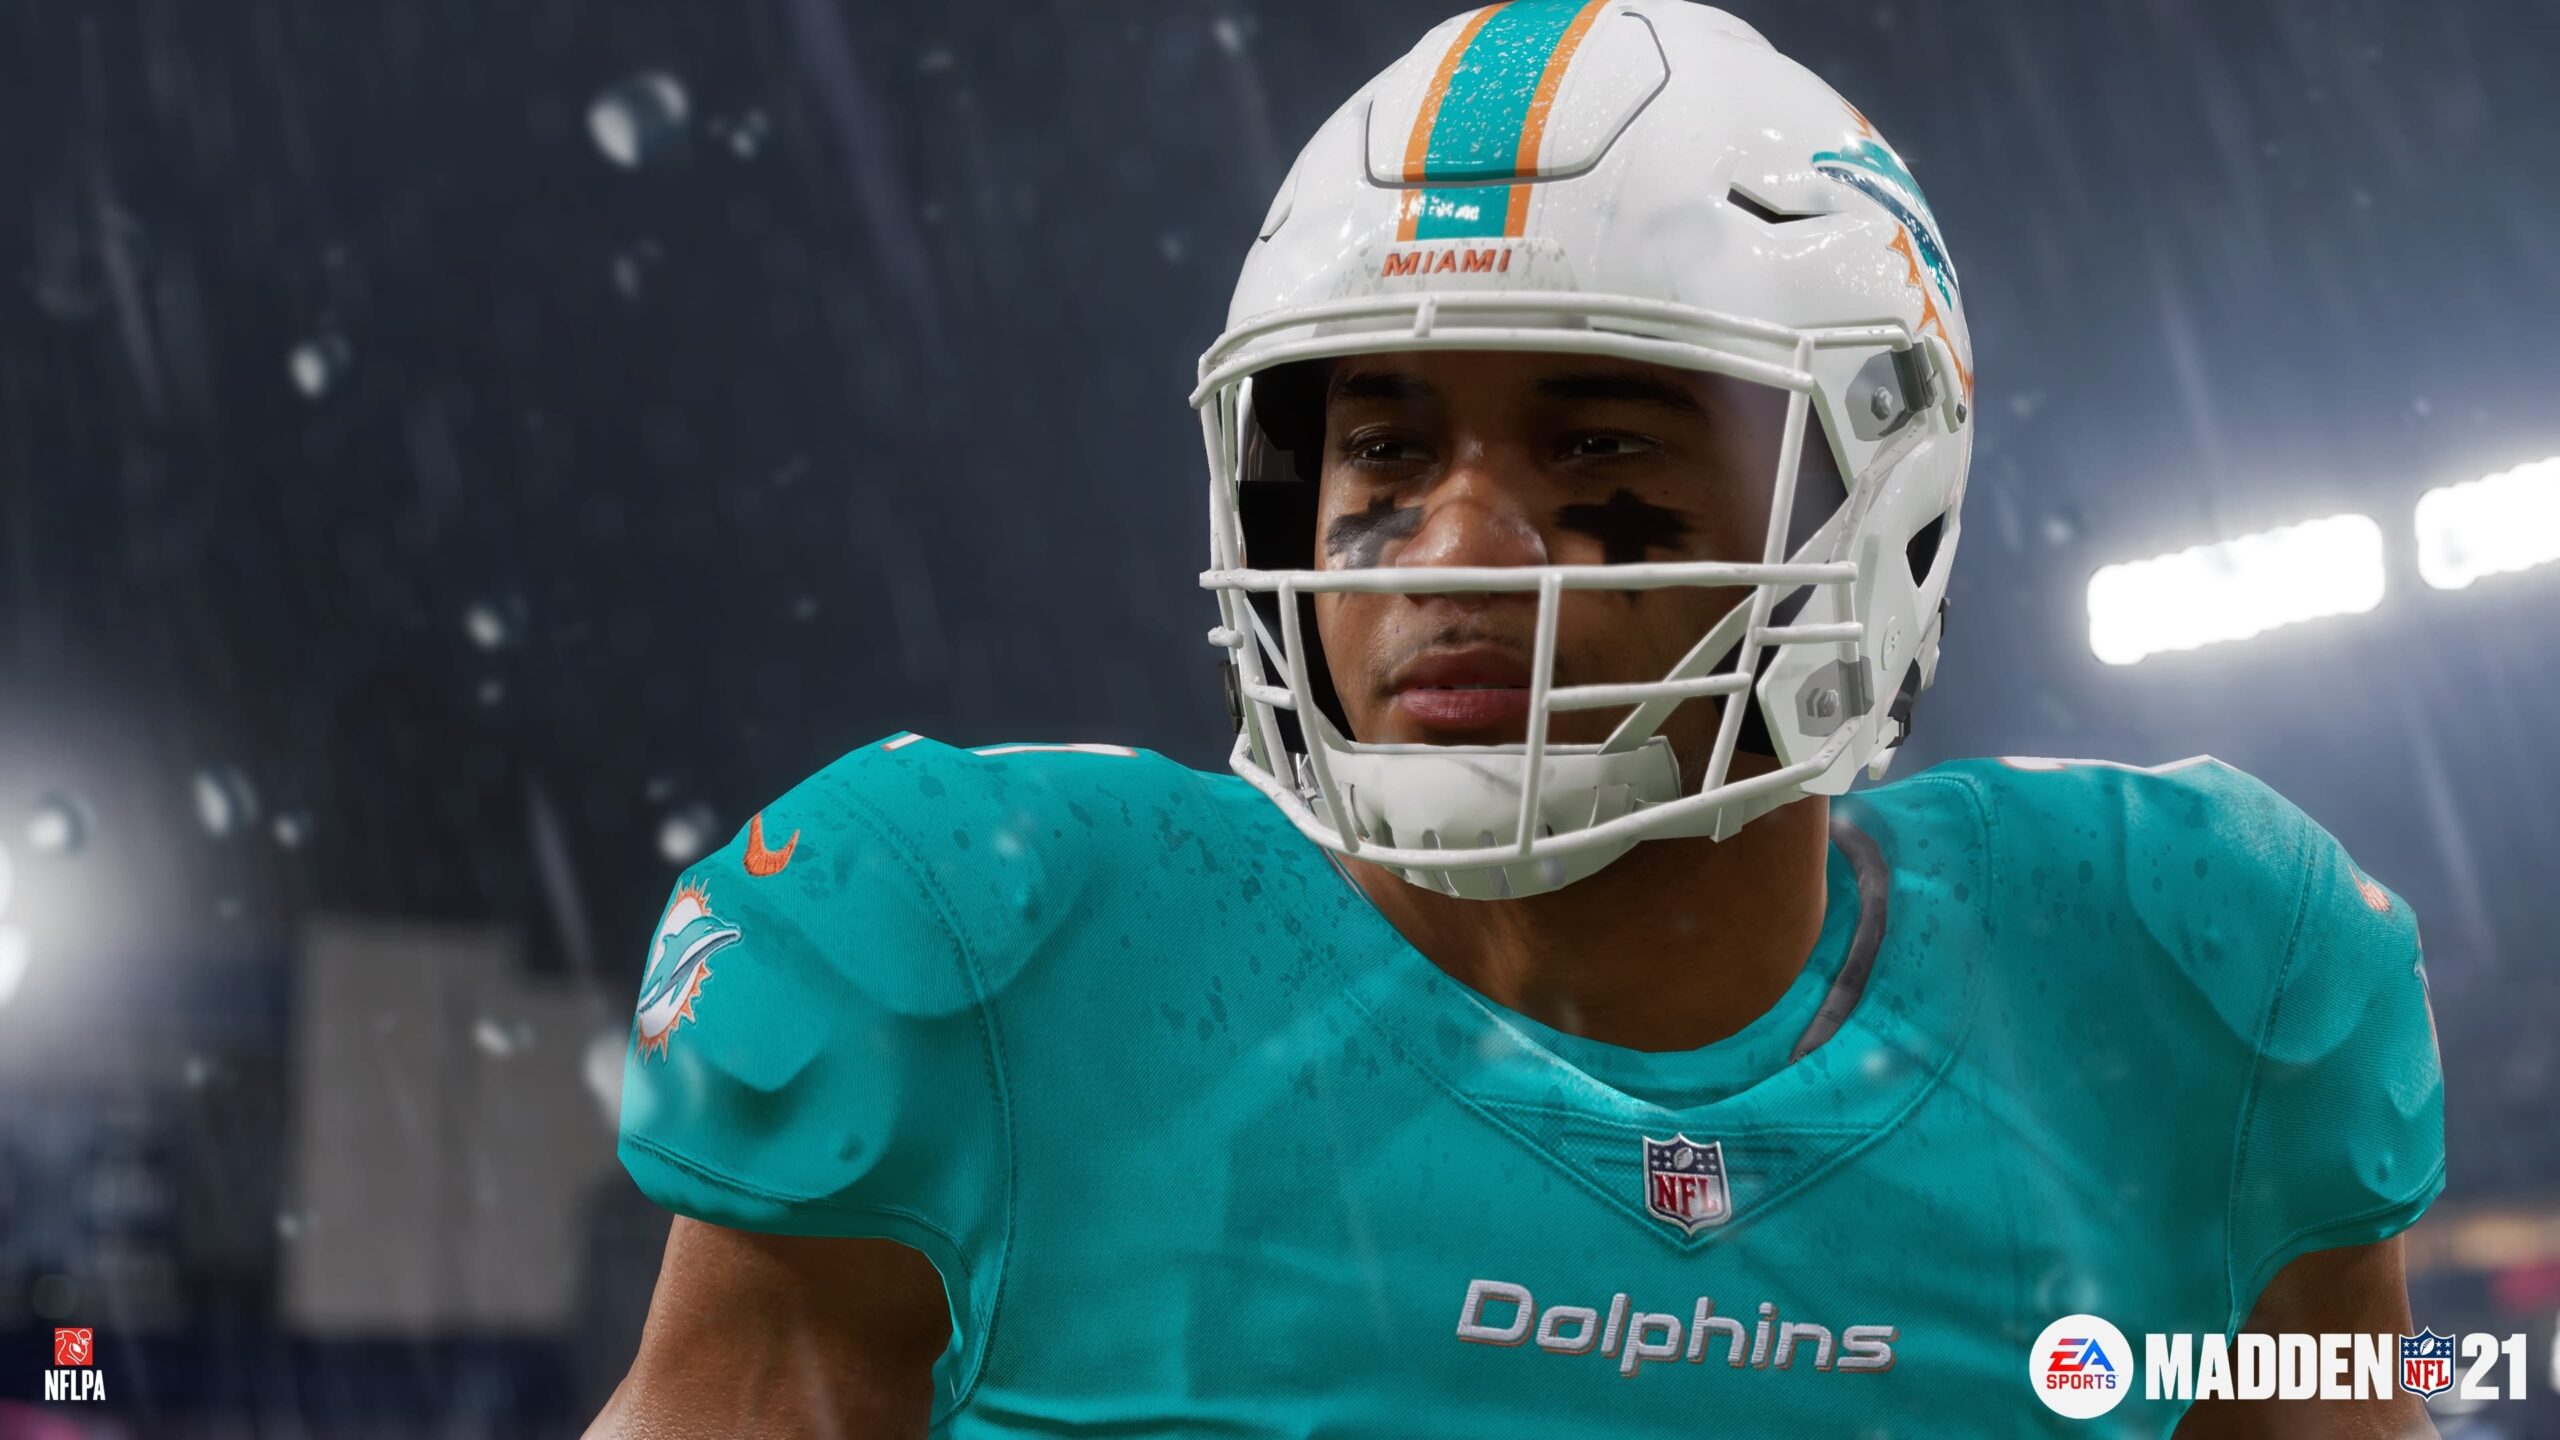 Madden nfl 21 unveils next generation gameplay fuelled by real-world nfl player data